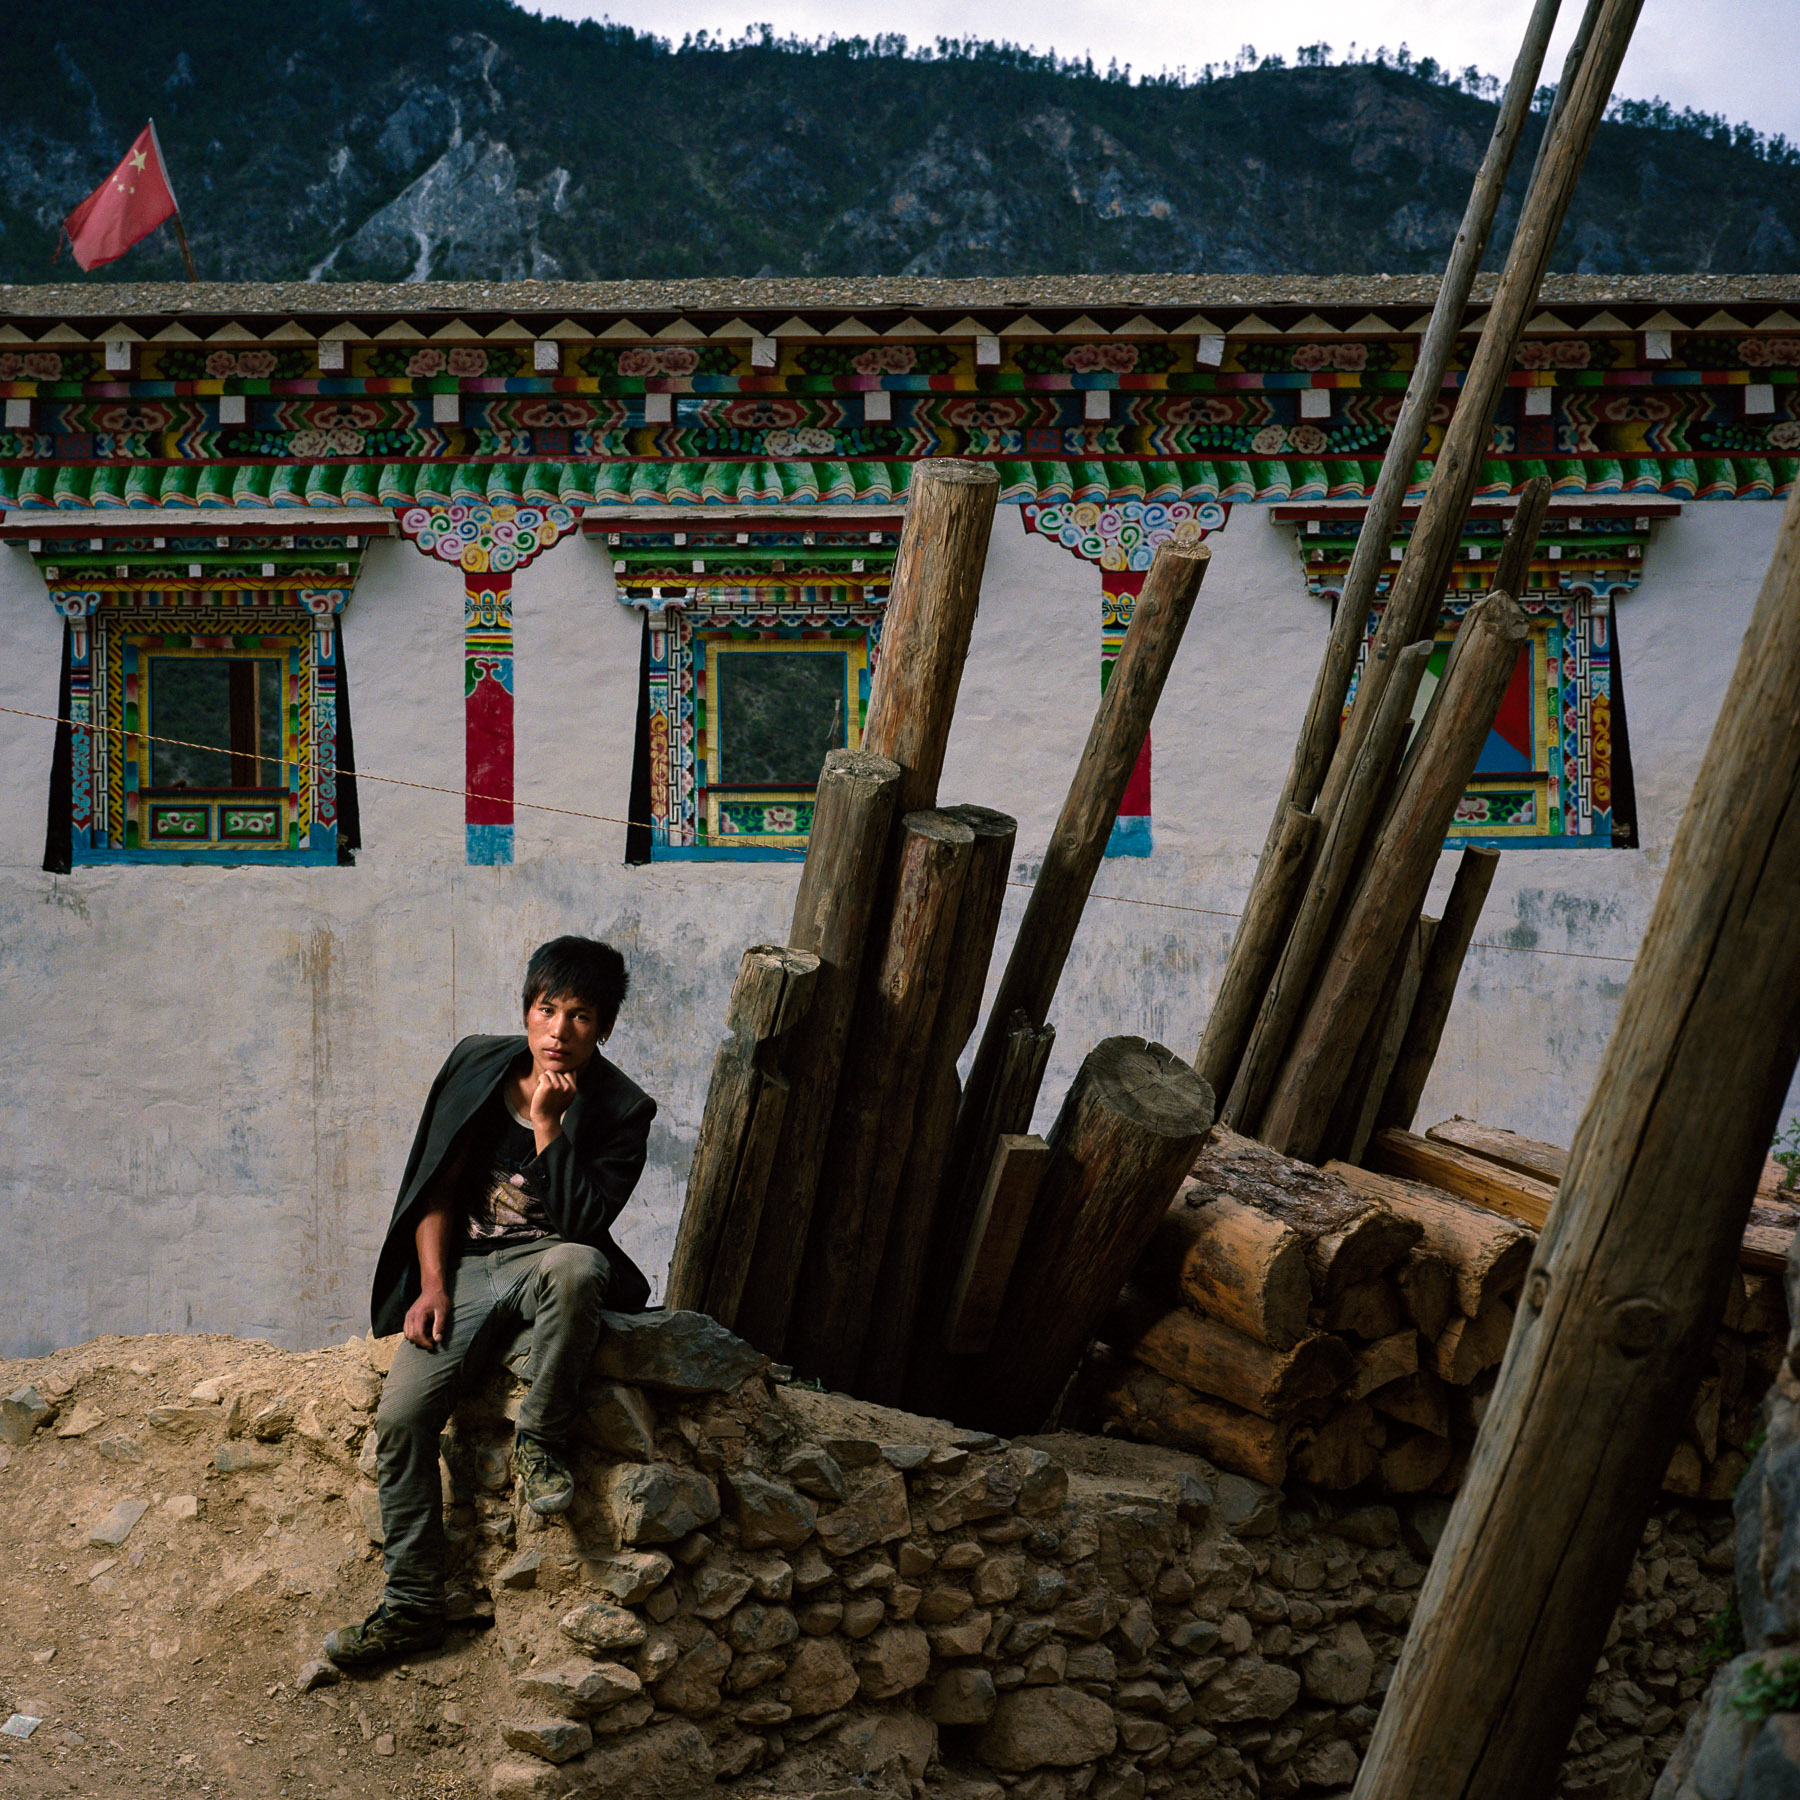  May 2012. Yunnan province, China. Portrait of Gesan Siri, Tibetan, 20 years old in the village of Aben on the trail of the buddhist pilgrimage of the Kawa Karpo. 